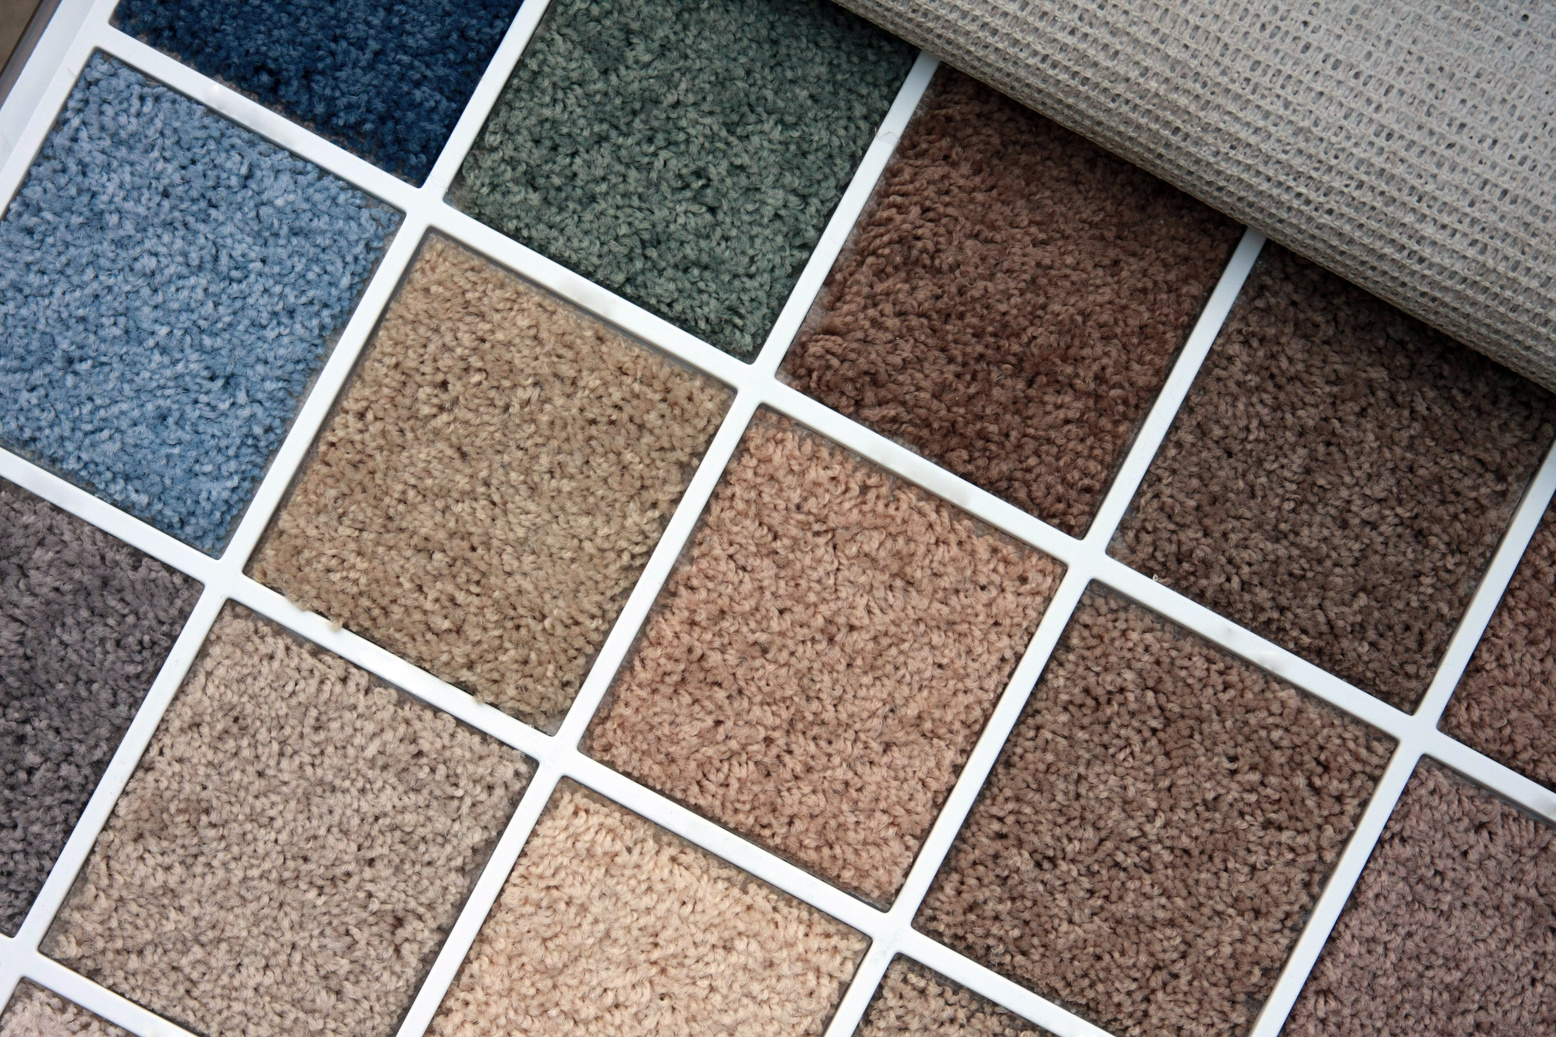 Sample book of different color carpets